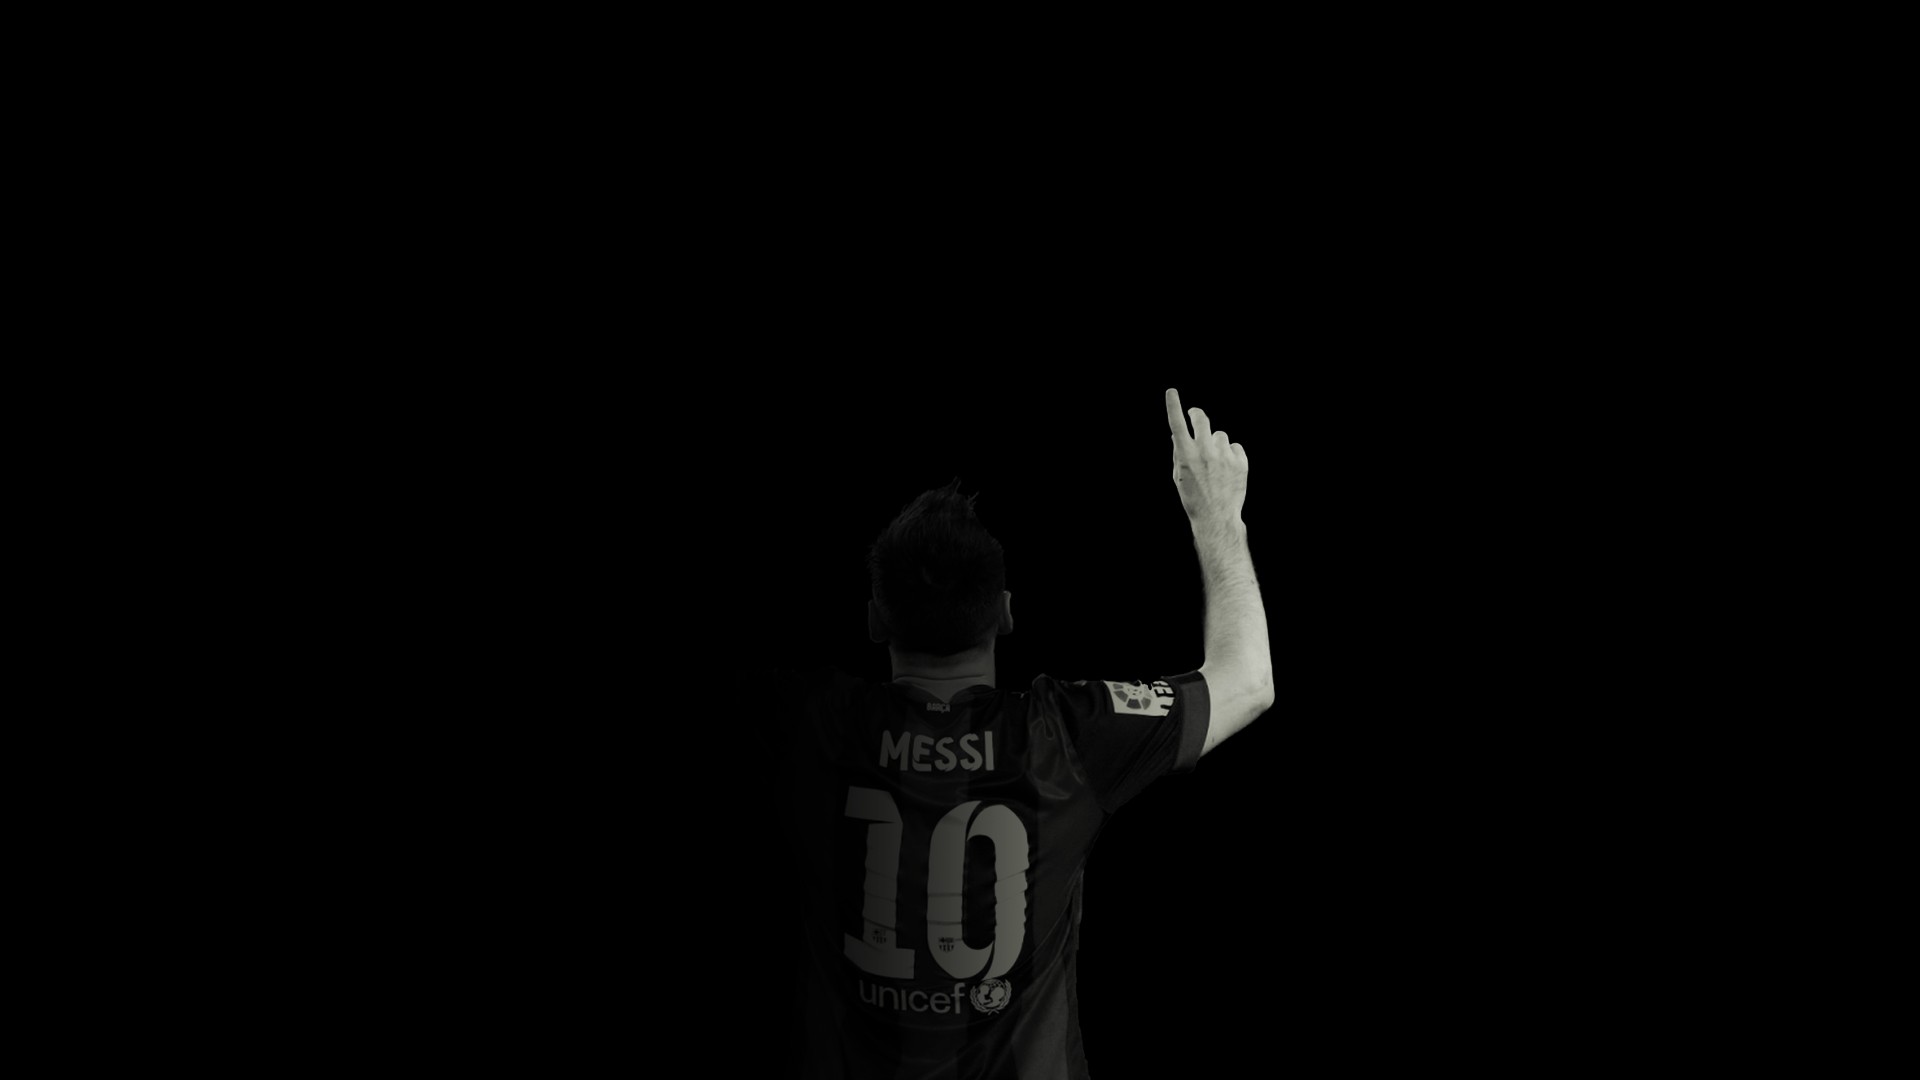 messi, Black and red, Lionel Messi Wallpaper